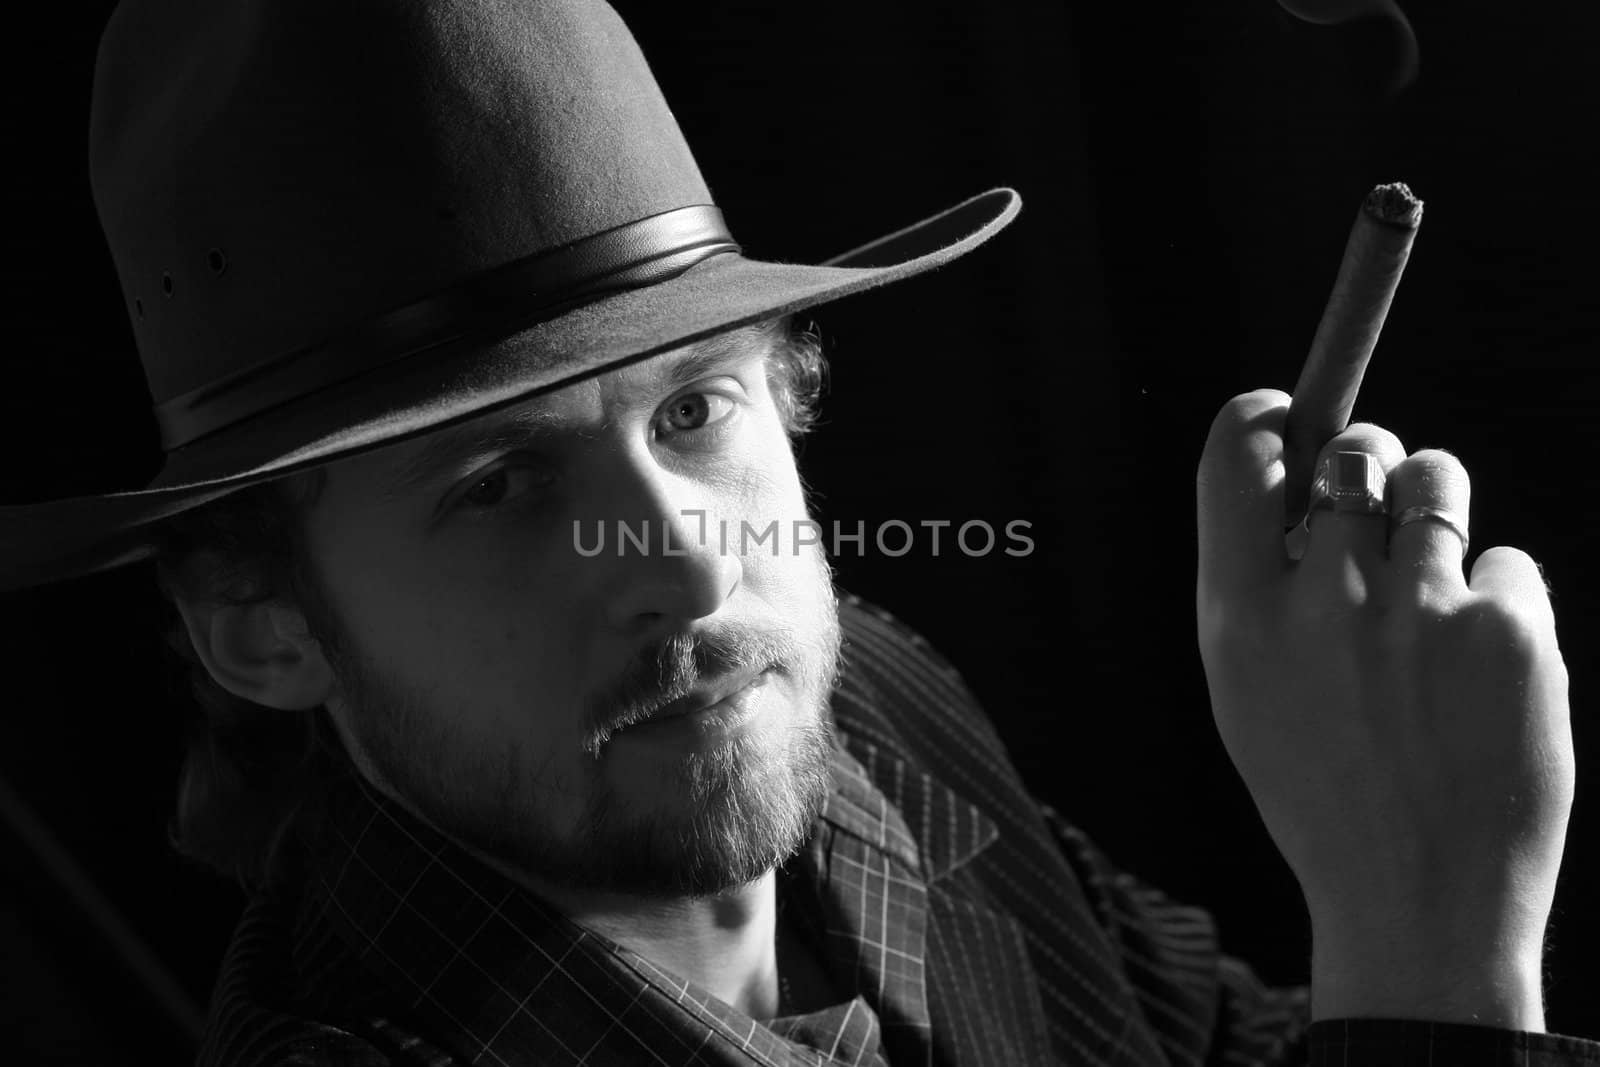 A man in hat keeping a cigar in his fingers